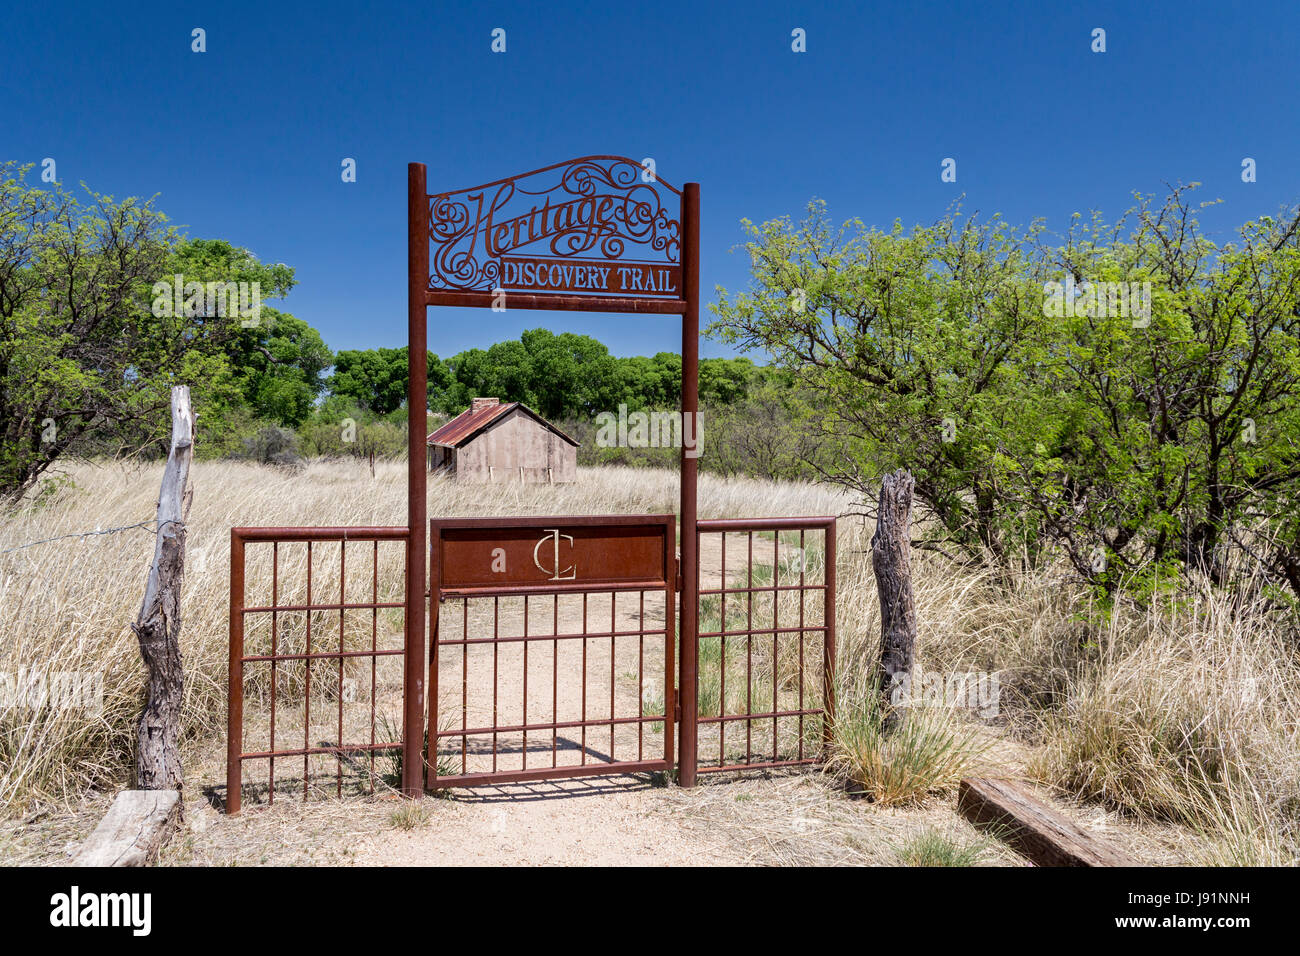 Sonoita, Arizona - The entrance to the Heritage Discovery Trail at the historic Empire Ranch, once one of the largest cattle ranches in America. The r Stock Photo